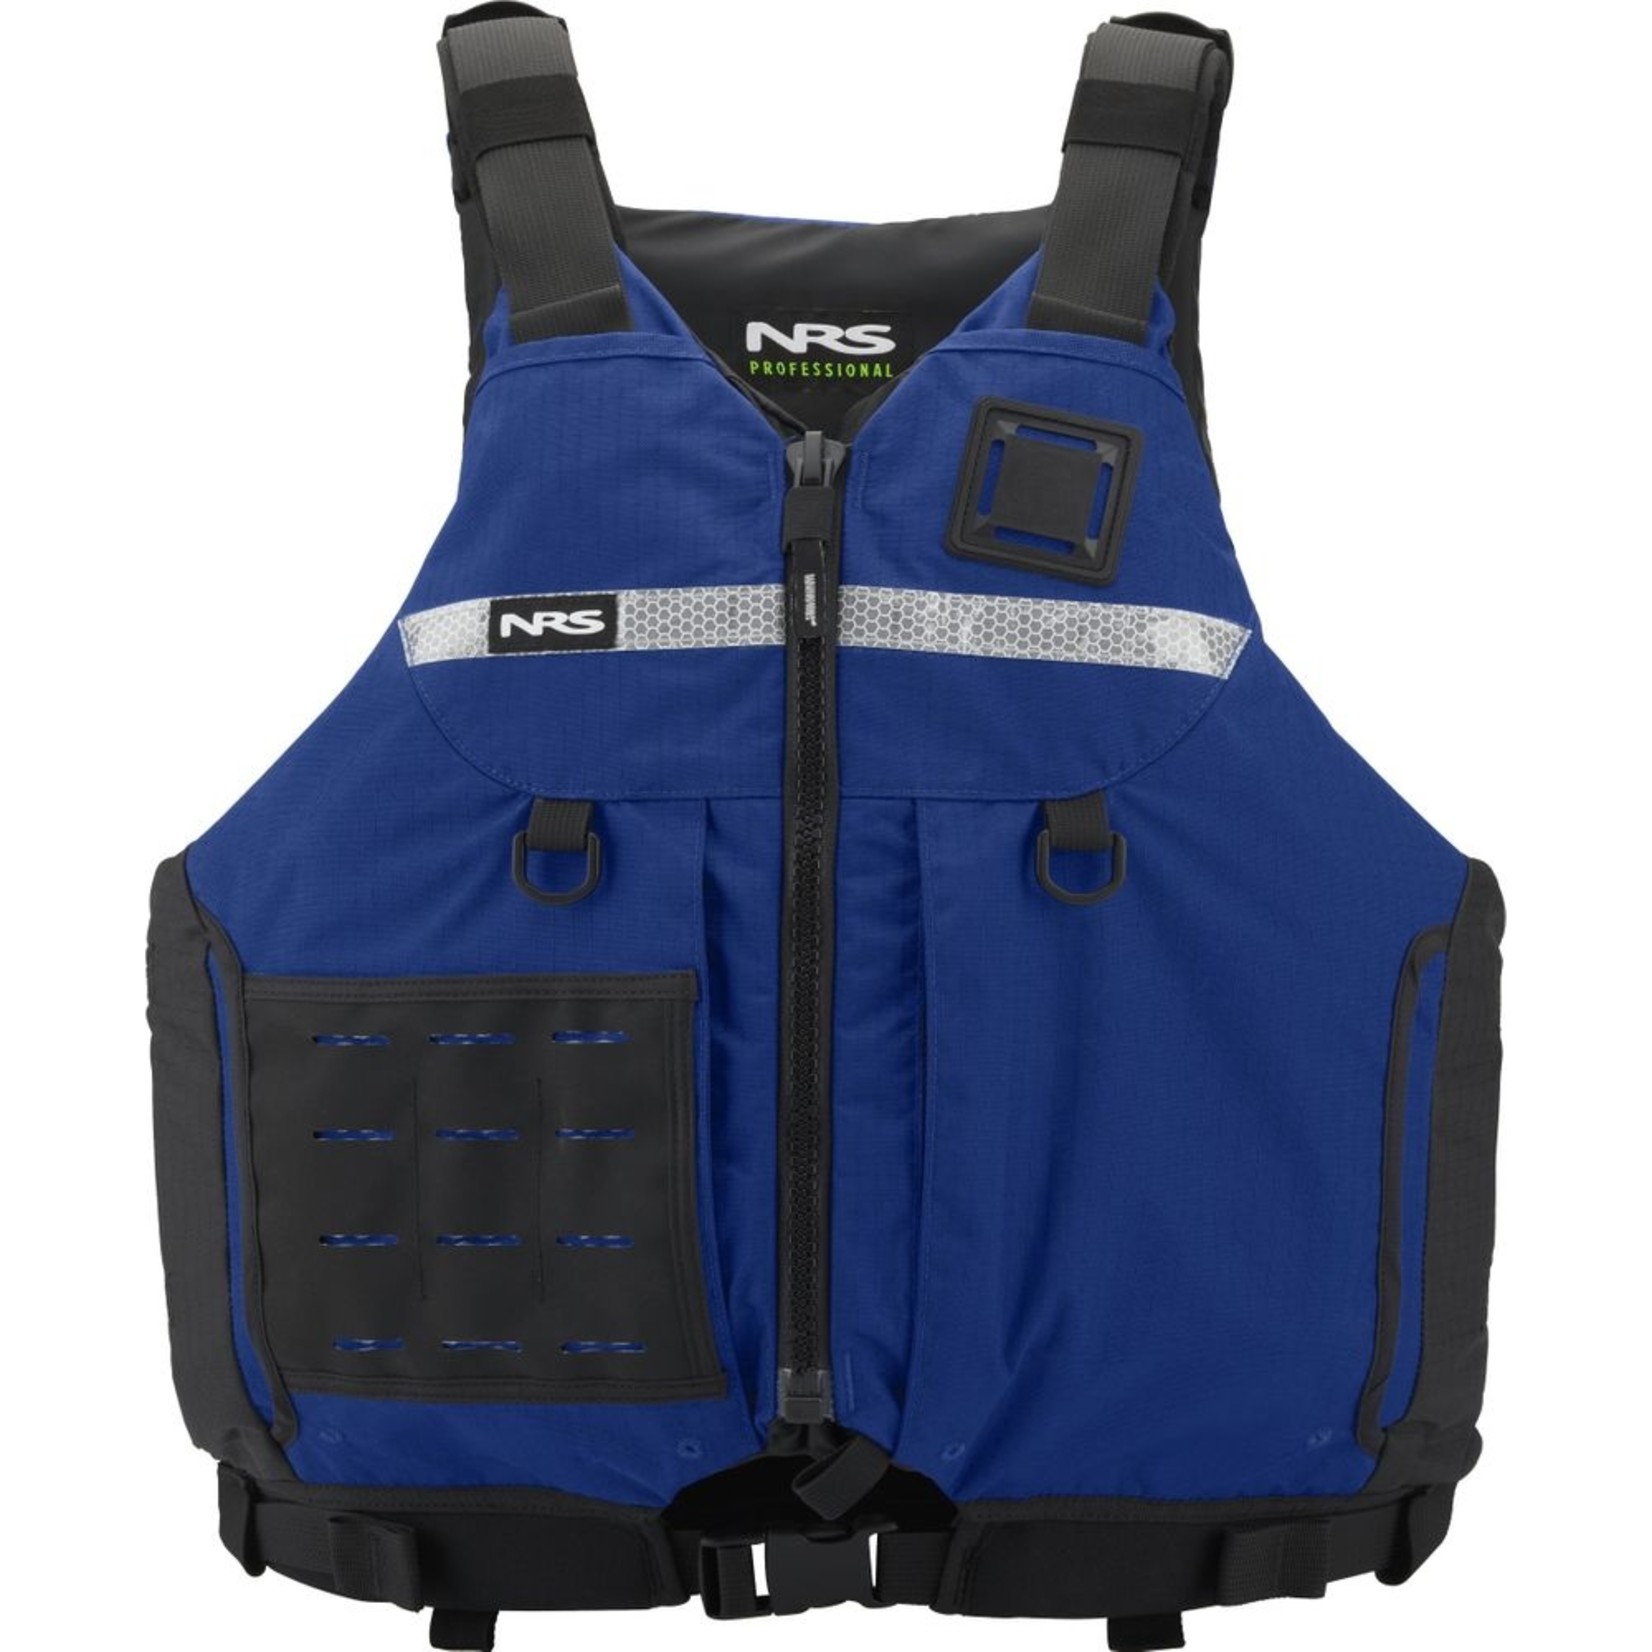 NRS NRS Big Water Guide PFD